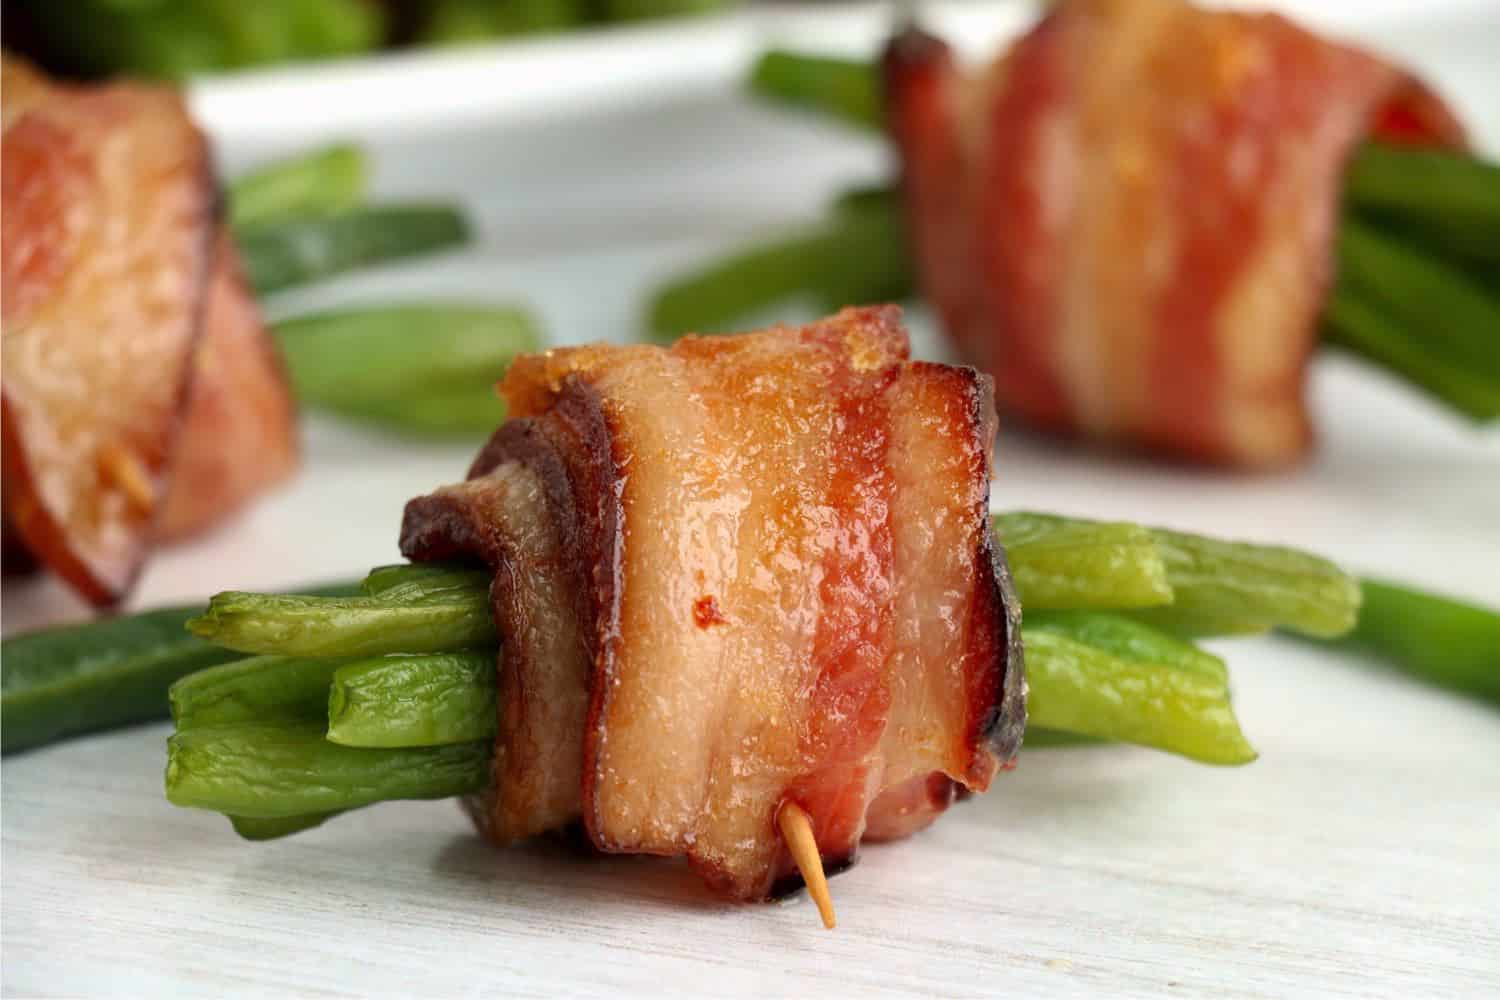 Cooked bacon wrapped green beans. One bundle is close up and two more are blurry in the background